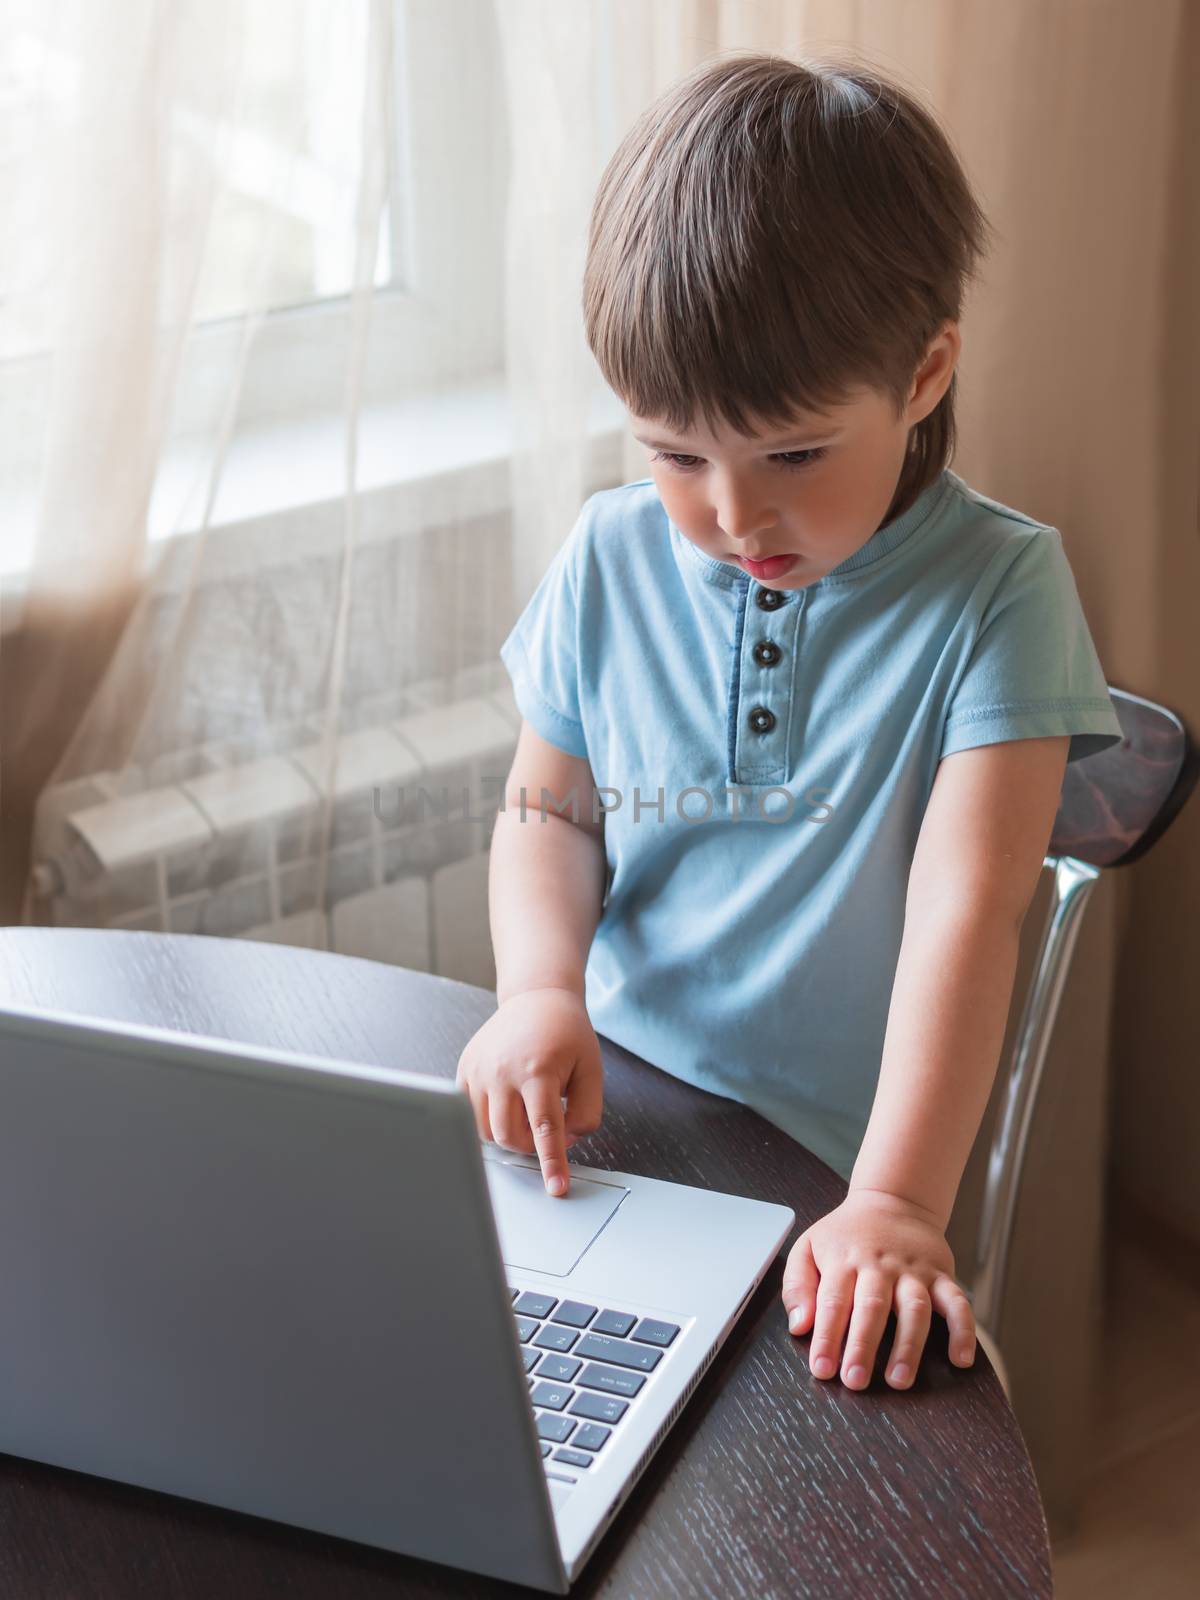 Curious toddler boy explores the laptop and presses buttons on computer keyboard.